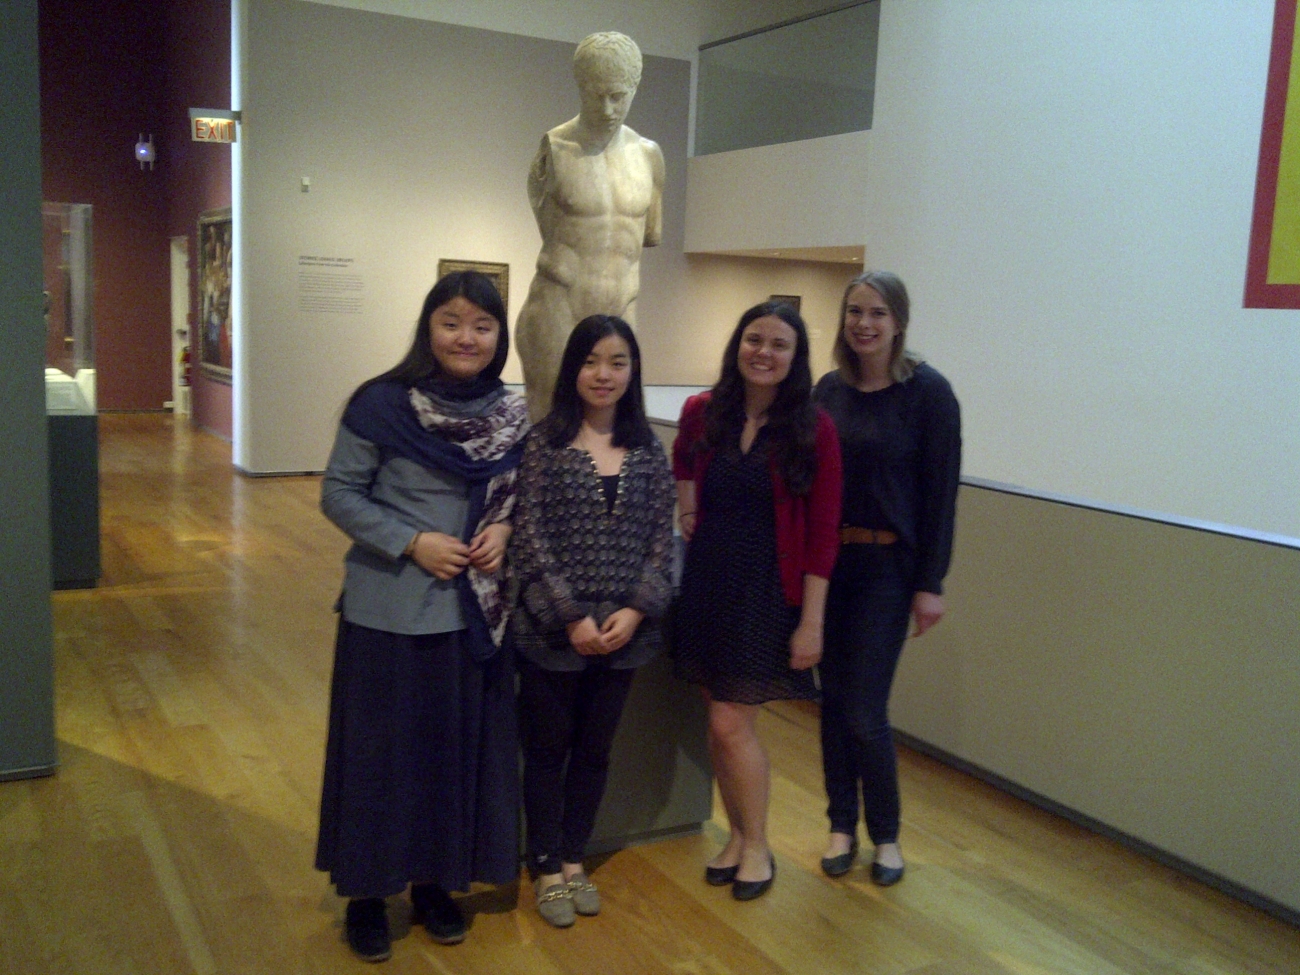 4 students standing in front of armless statue in museum